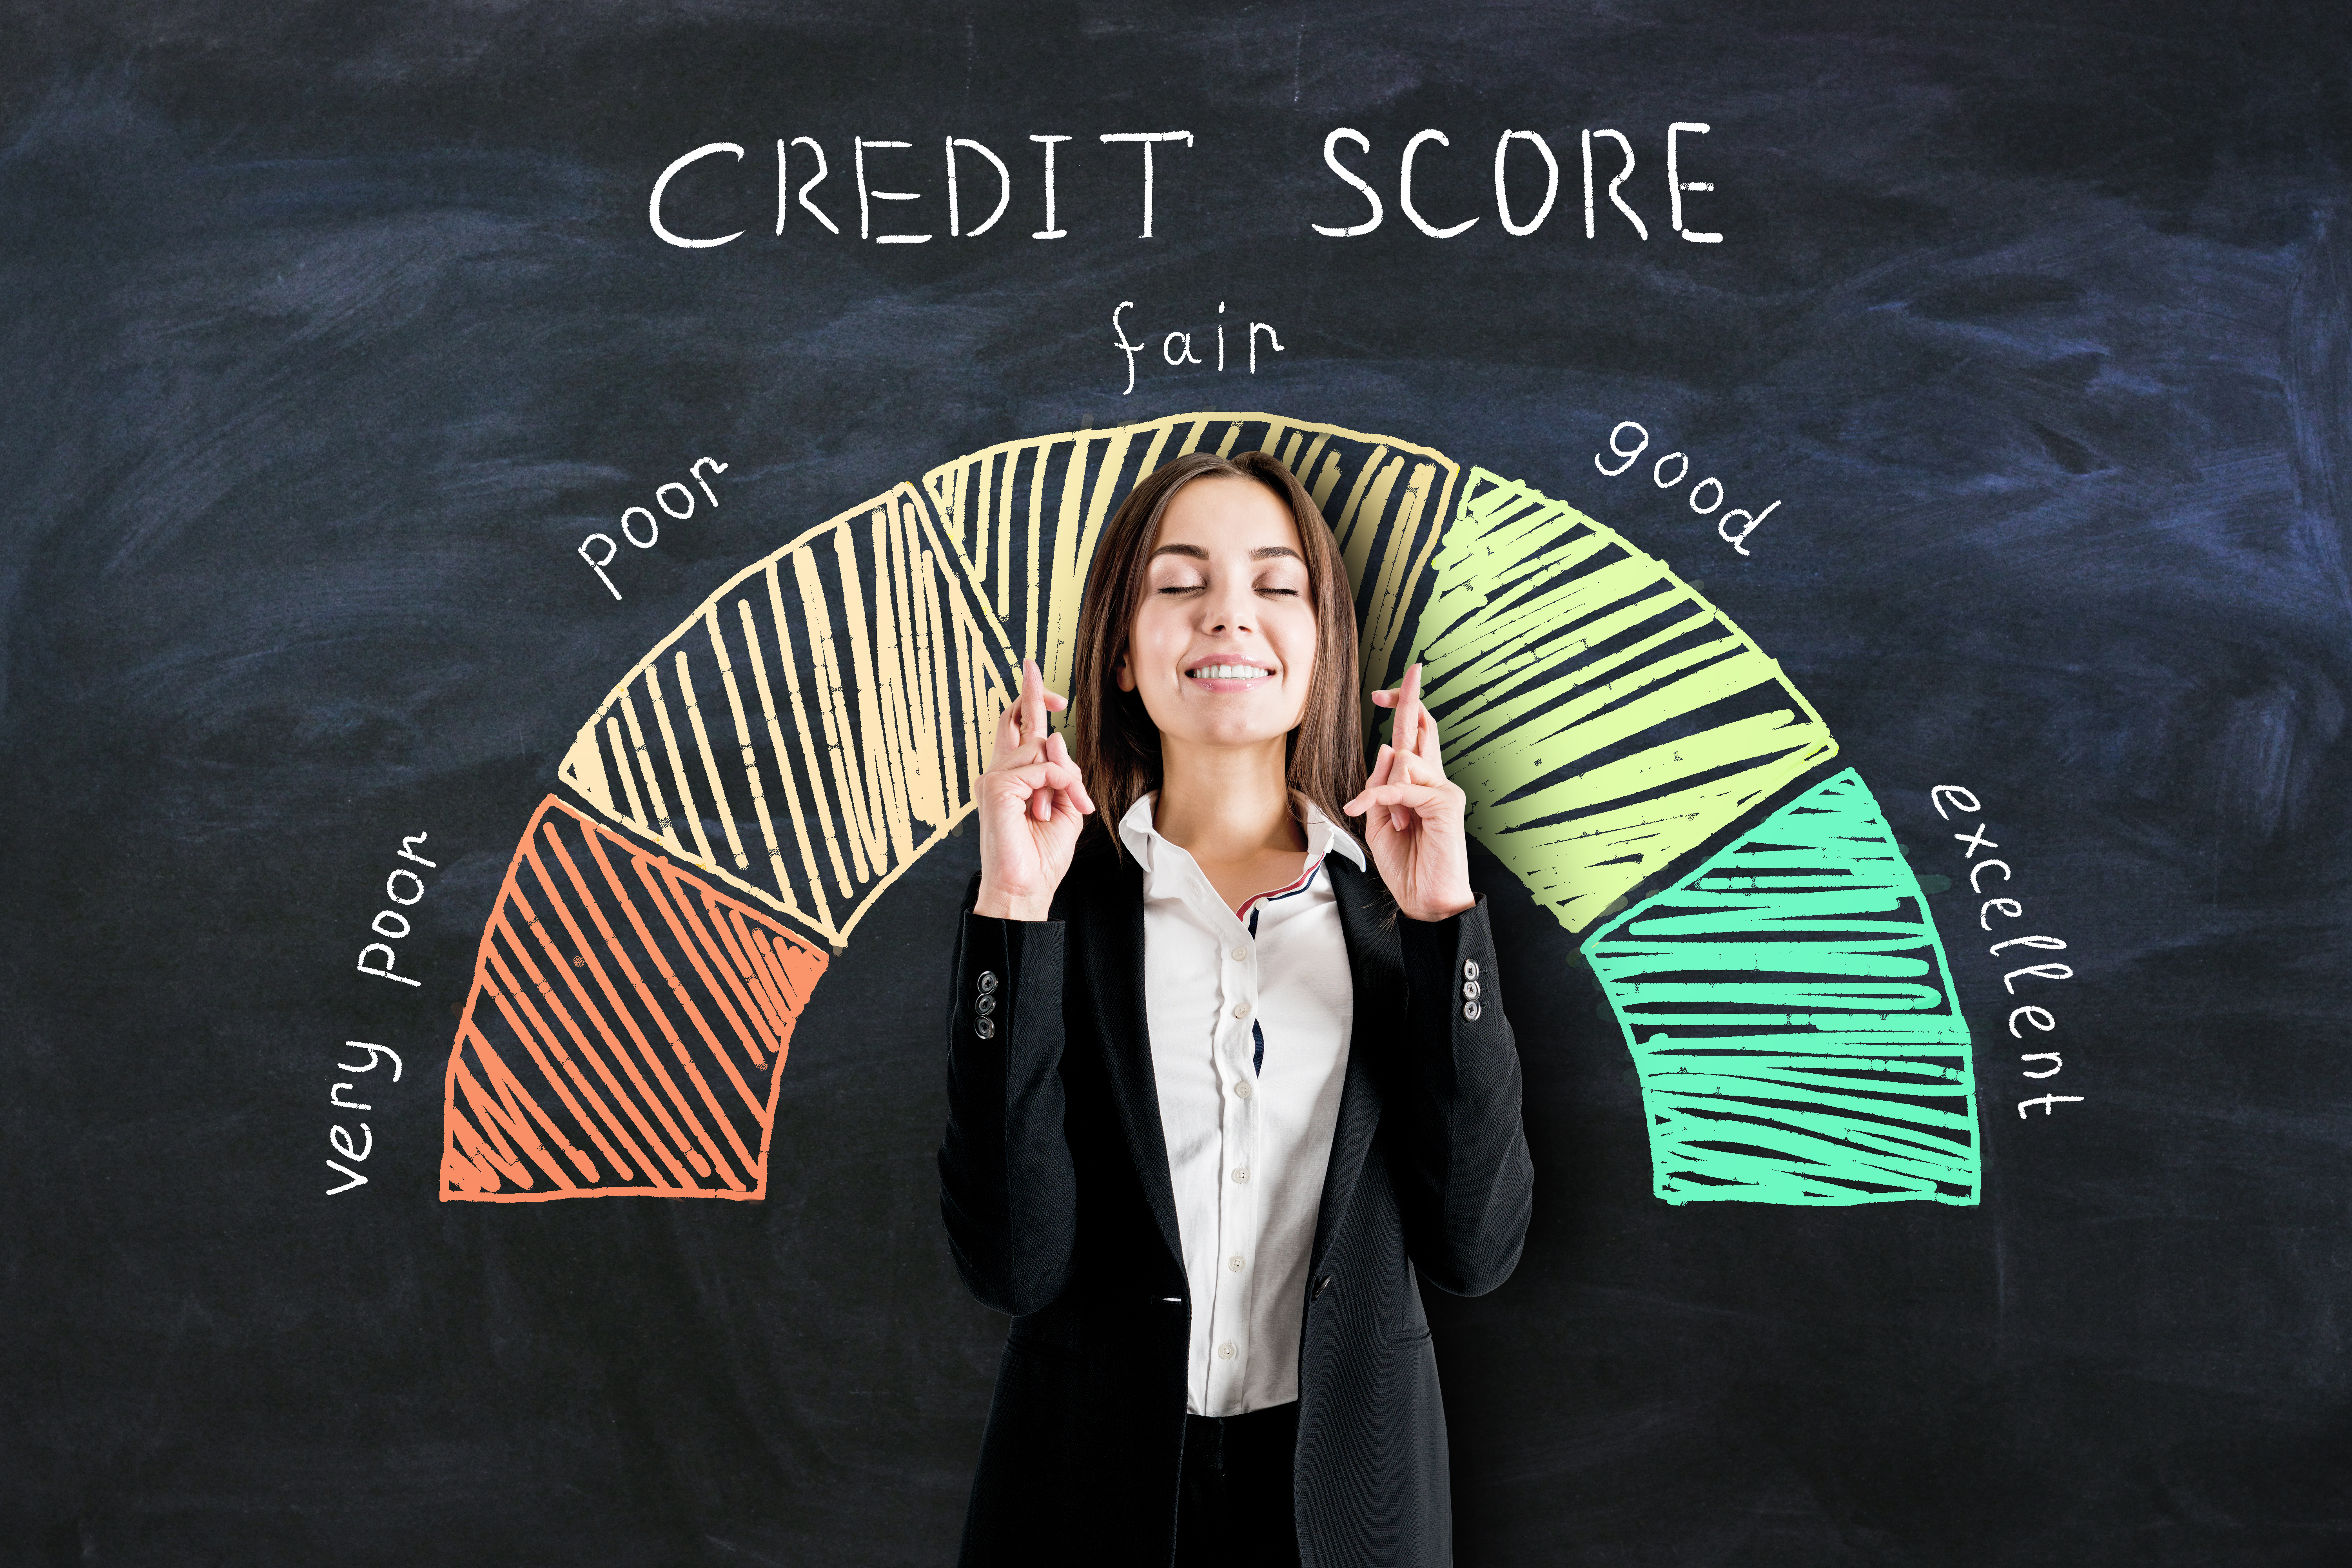 woman crossing her fingers while standing in front of a credit score meter